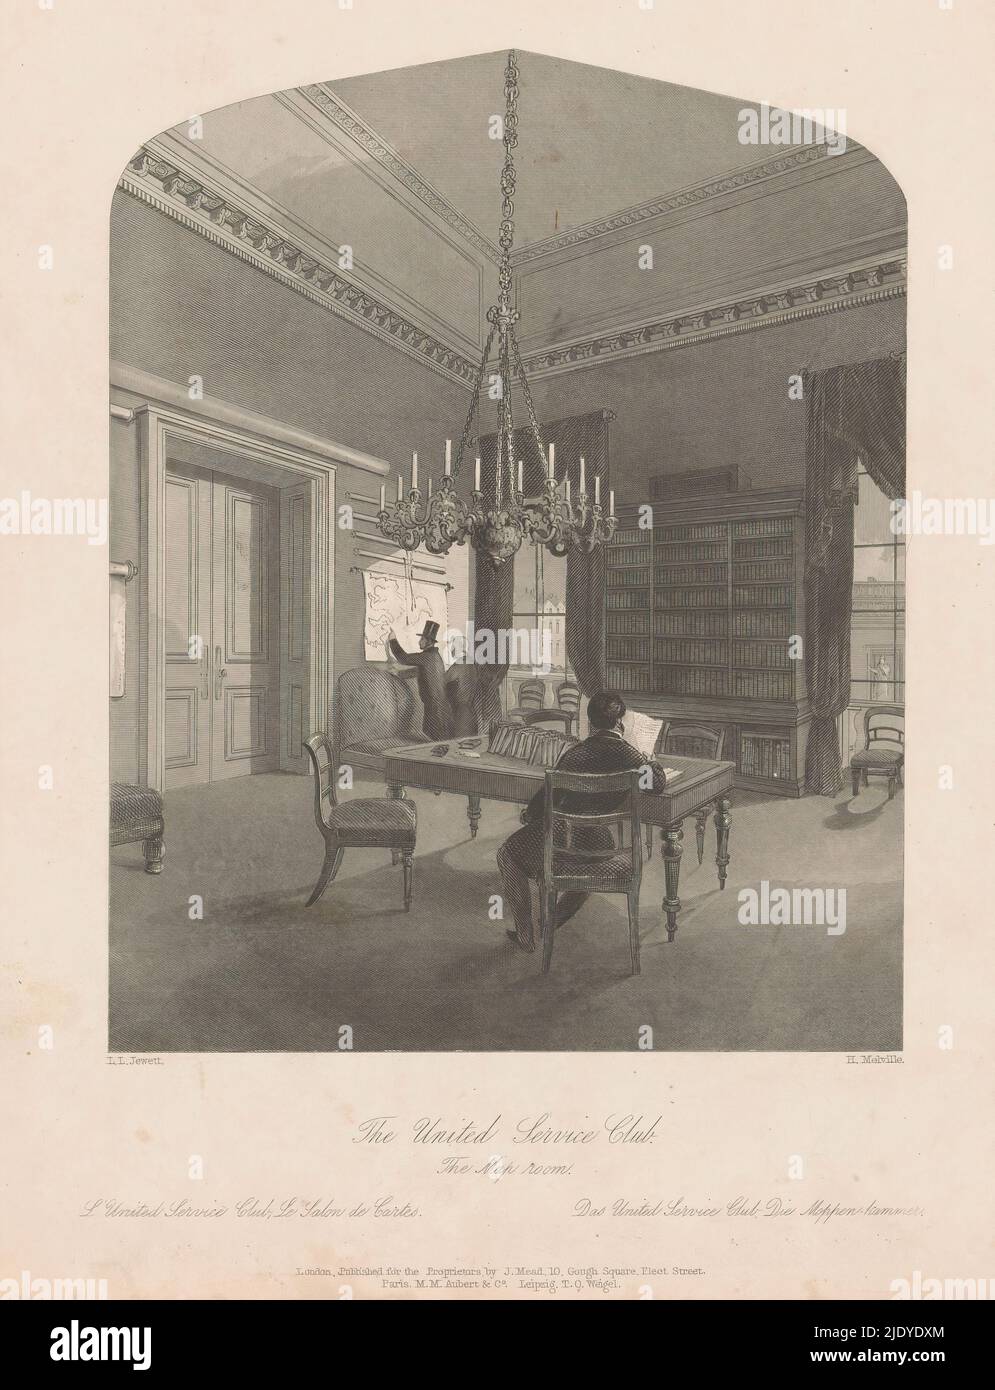 Interior of The Map Room of The United Service Club in London, The United Service Club. The Map room, Under a chandelier in the center of the room a reading table behind which a man is reading. Two men are looking at a wall map, against a wall between two windows is a bookcase. Titled in English, French and German., print maker: Henry Melville, (mentioned on object), after design by: Llewelynn Frederick William Jewitt, (mentioned on object), publisher: Joseph Mead, (mentioned on object), publisher: London, publisher: Paris, publisher: Leipzig, 1841 - 1844, paper, steel engraving, height 268 mm Stock Photo